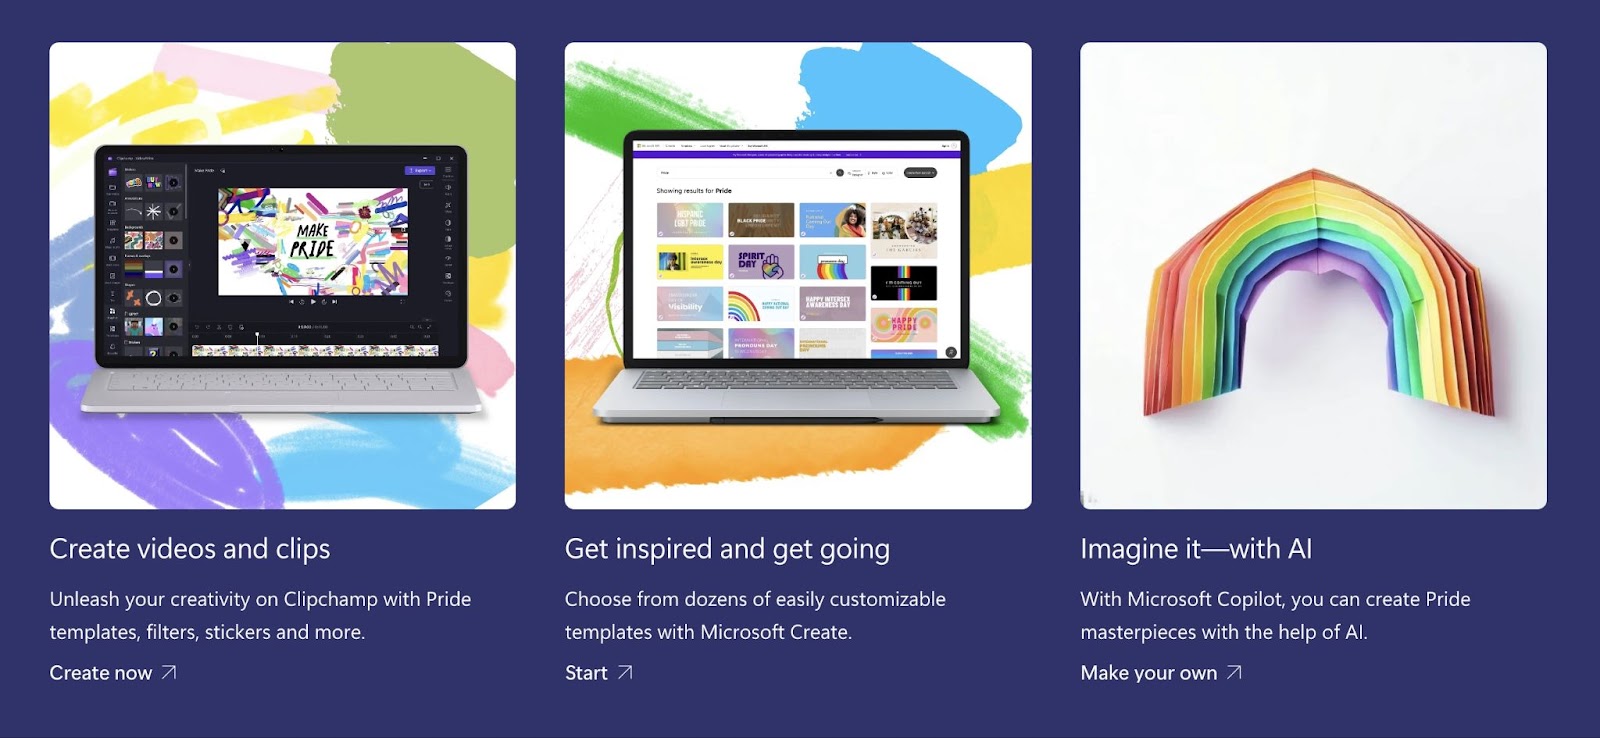 microsoft helps you create videos and clips, get inspiration with customizable templates, and create new images with AI.